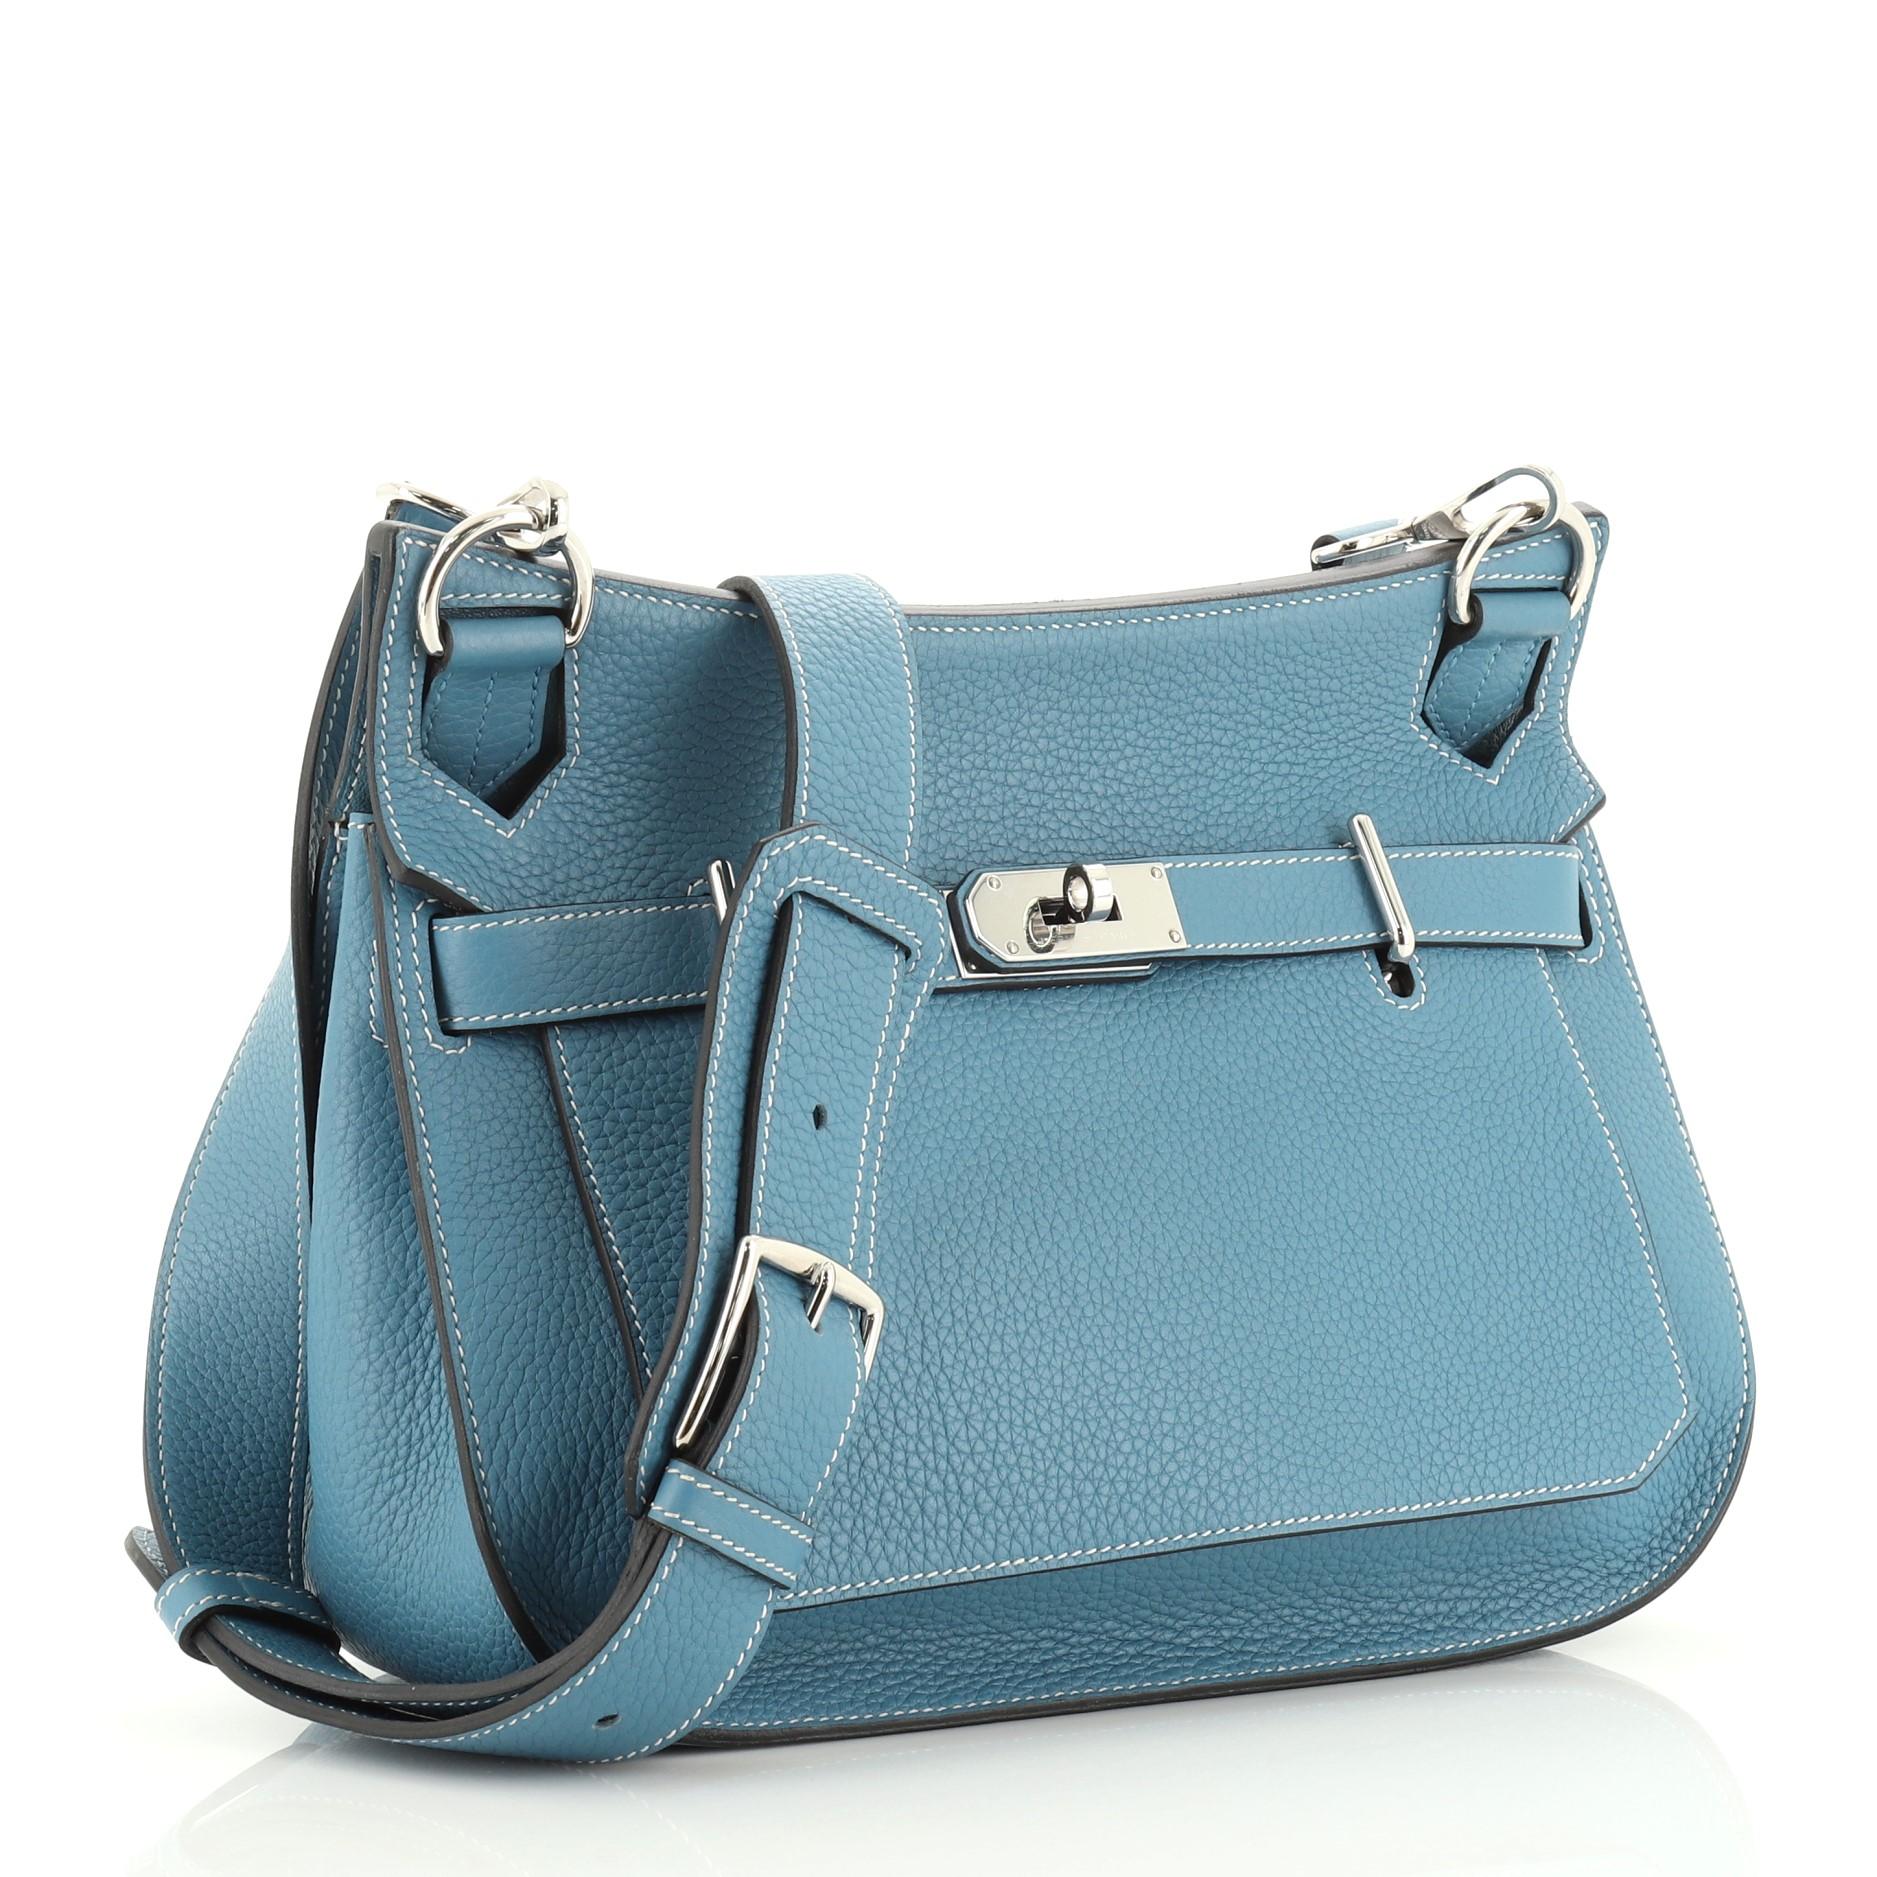 This Hermes Jypsiere Handbag Clemence 31, crafted from Bleu Jean blue Clemence leather, features a flat adjustable leather shoulder strap and palladium hardware. Its front flap with turn-lock clasp closure opens to a Bleu Jean blue Chevre leather